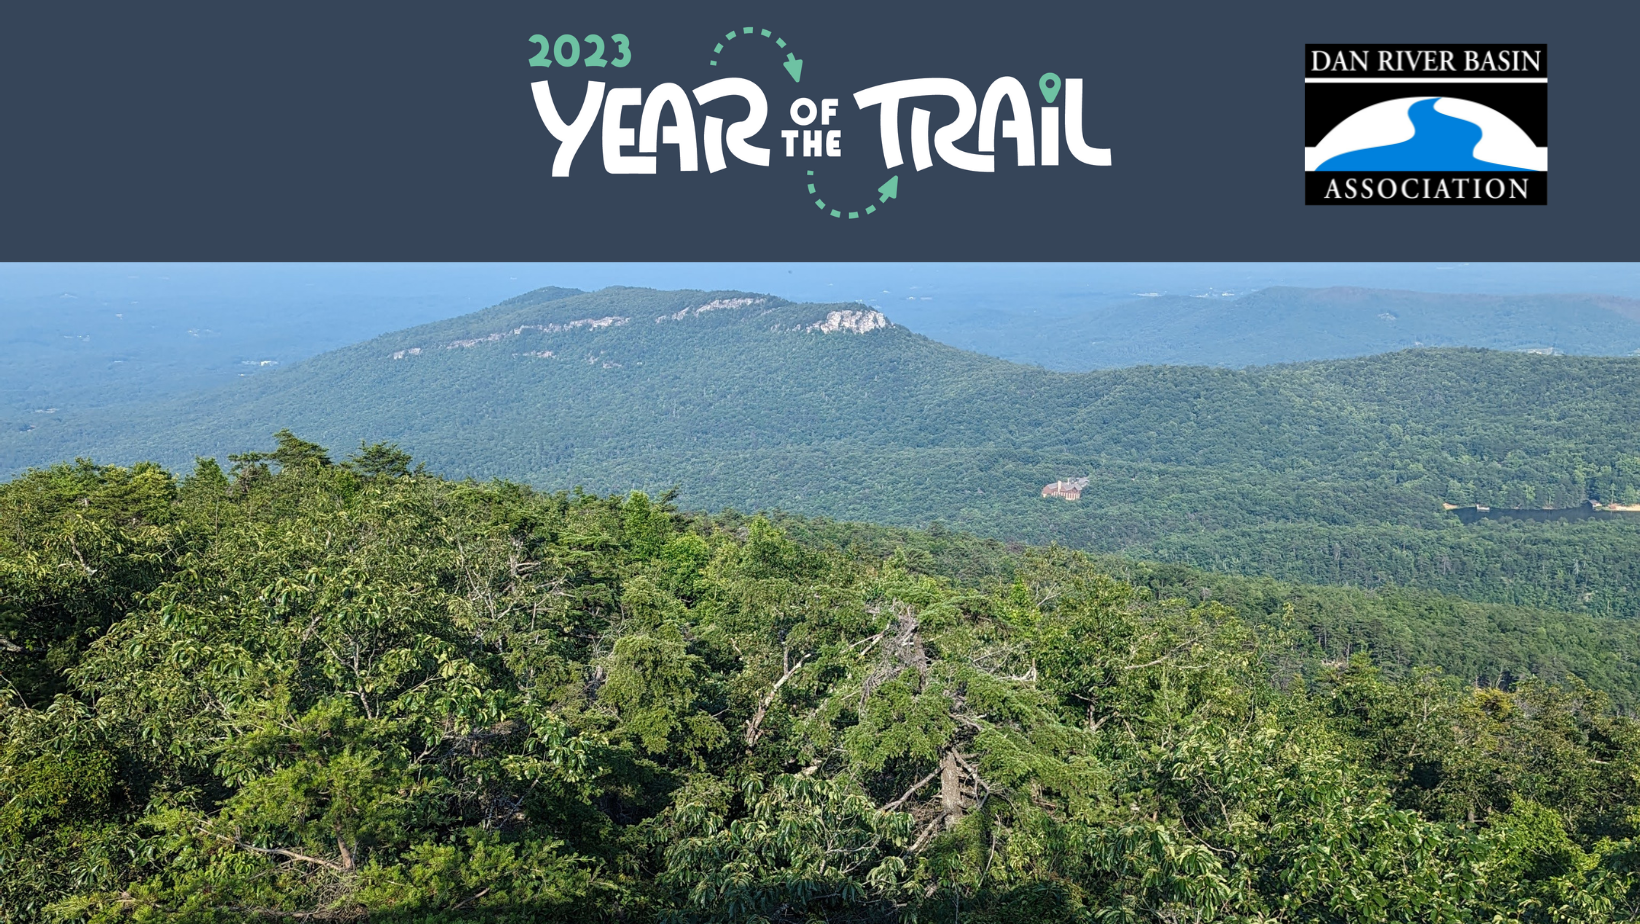 Celebrate year of the trail with DRBA! a view from hanging rock state park on the trail!